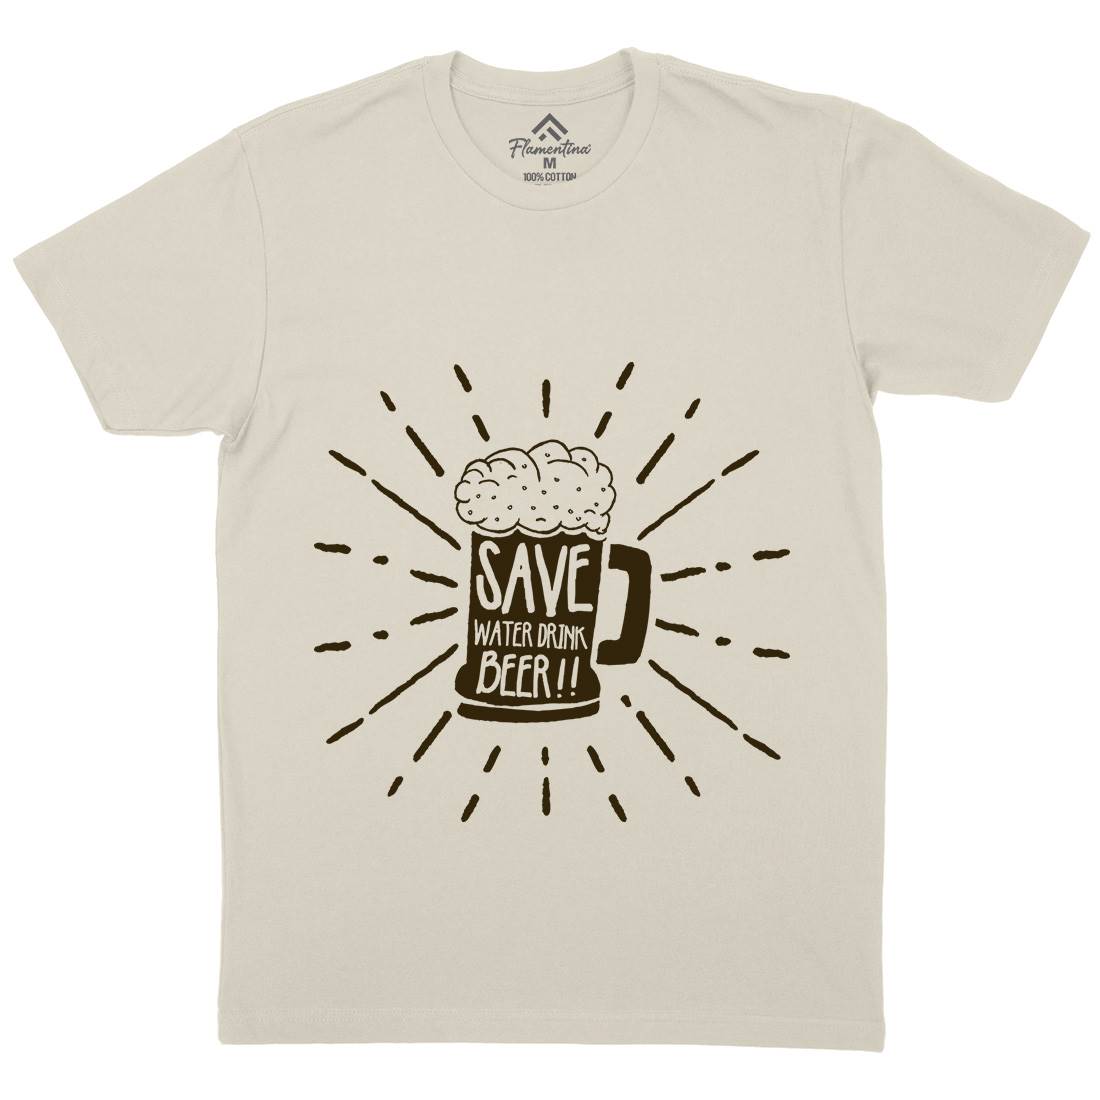 Save Water Mens Organic Crew Neck T-Shirt Drinks A368